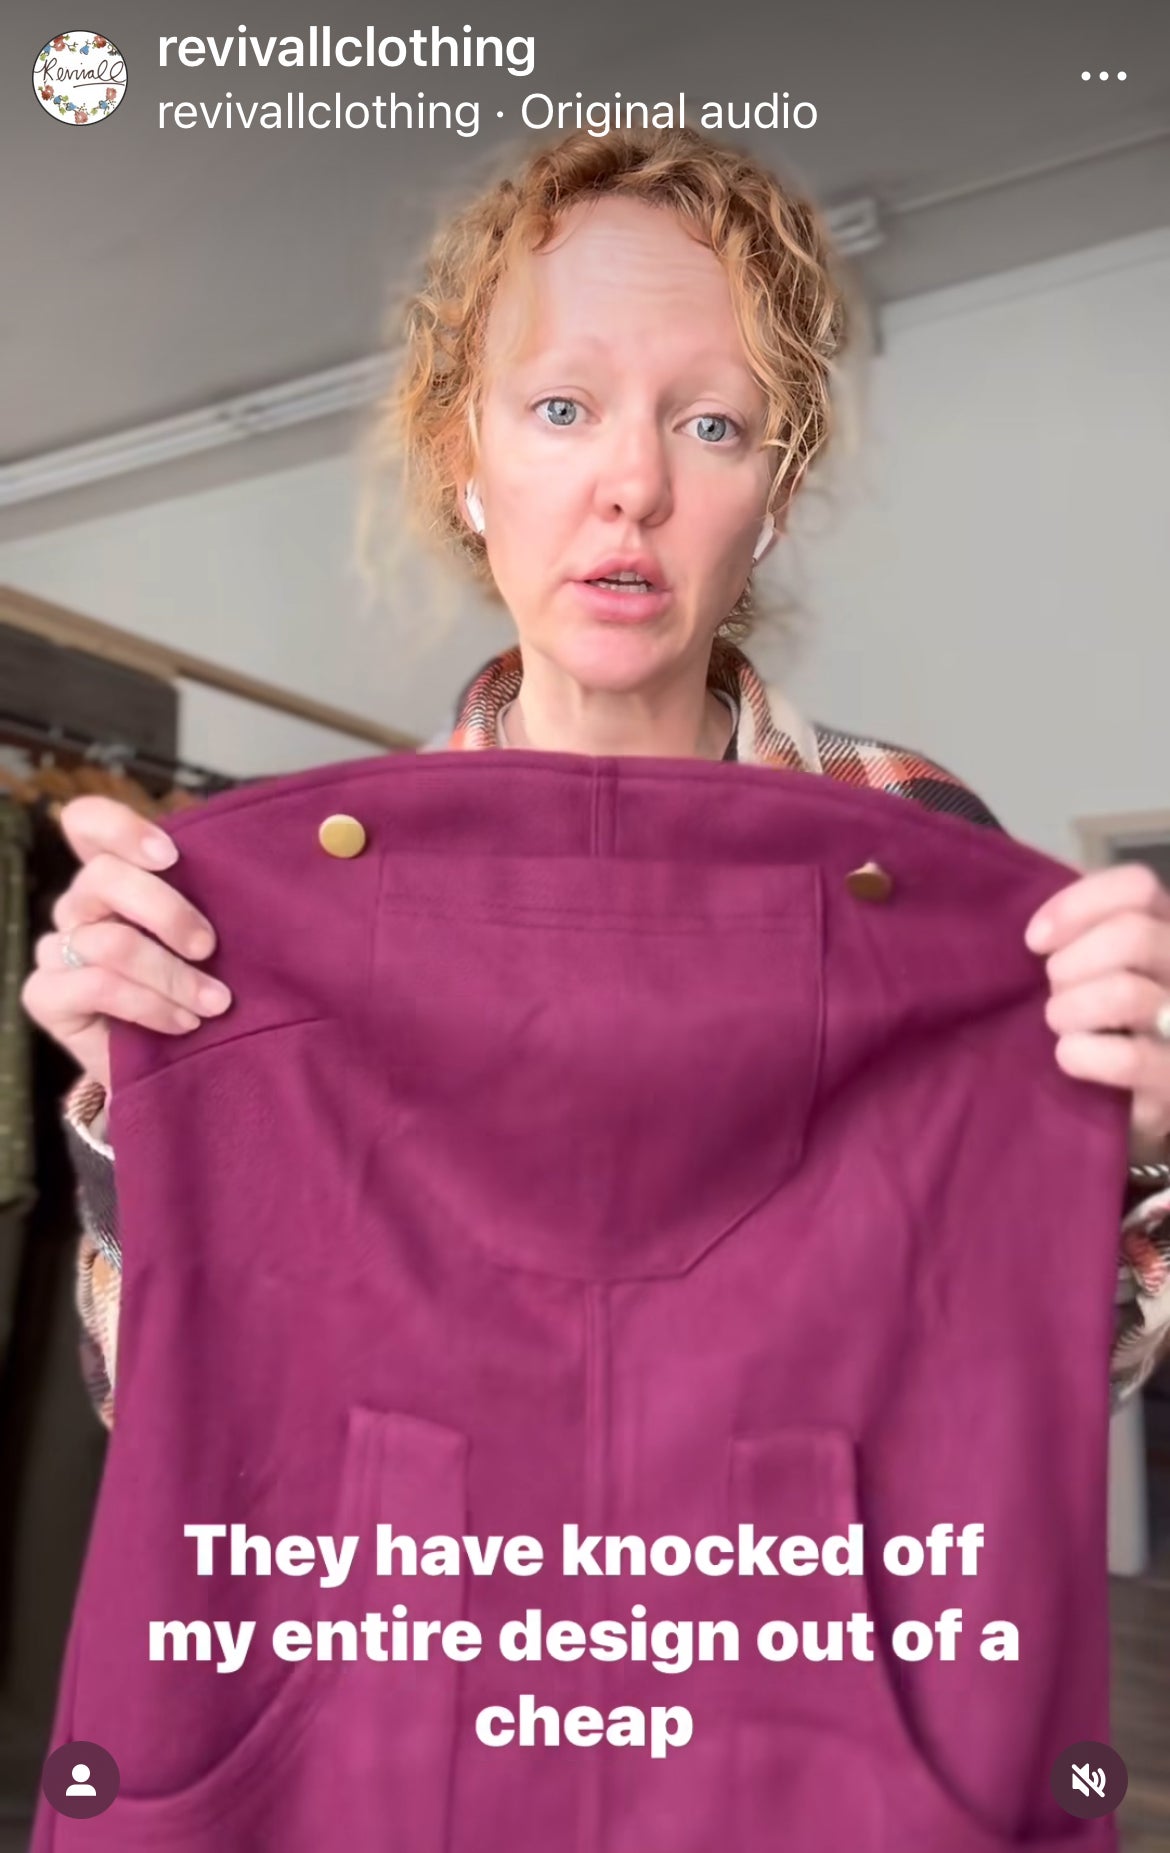 Woman holding up clothing, appearing distressed, with overlaid text about design knock-off